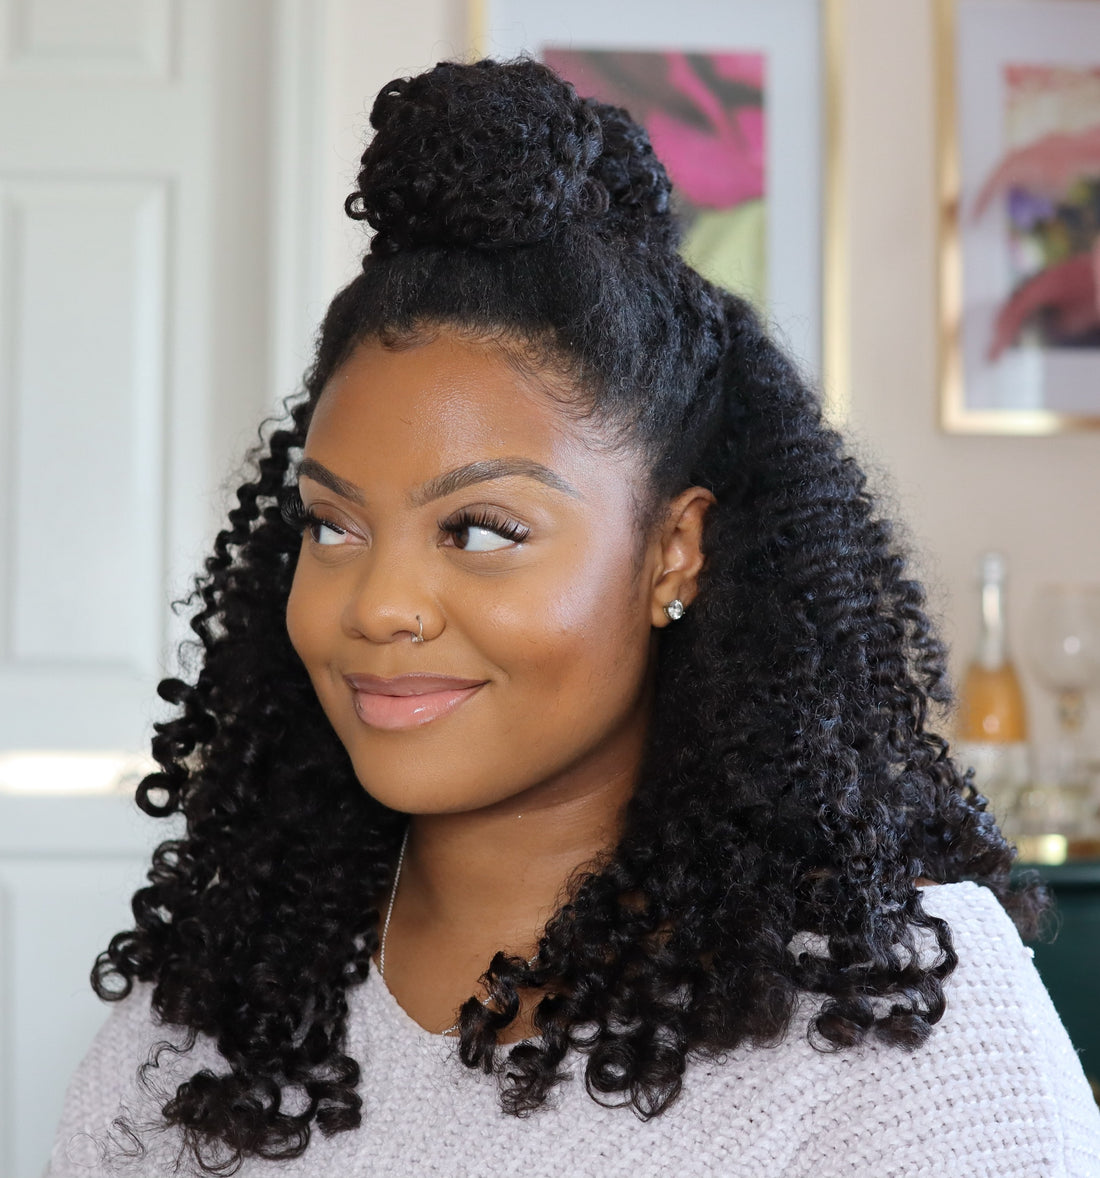 Apply These 5 Secret Techniques to Improve Your Long Curly Crochet Hair